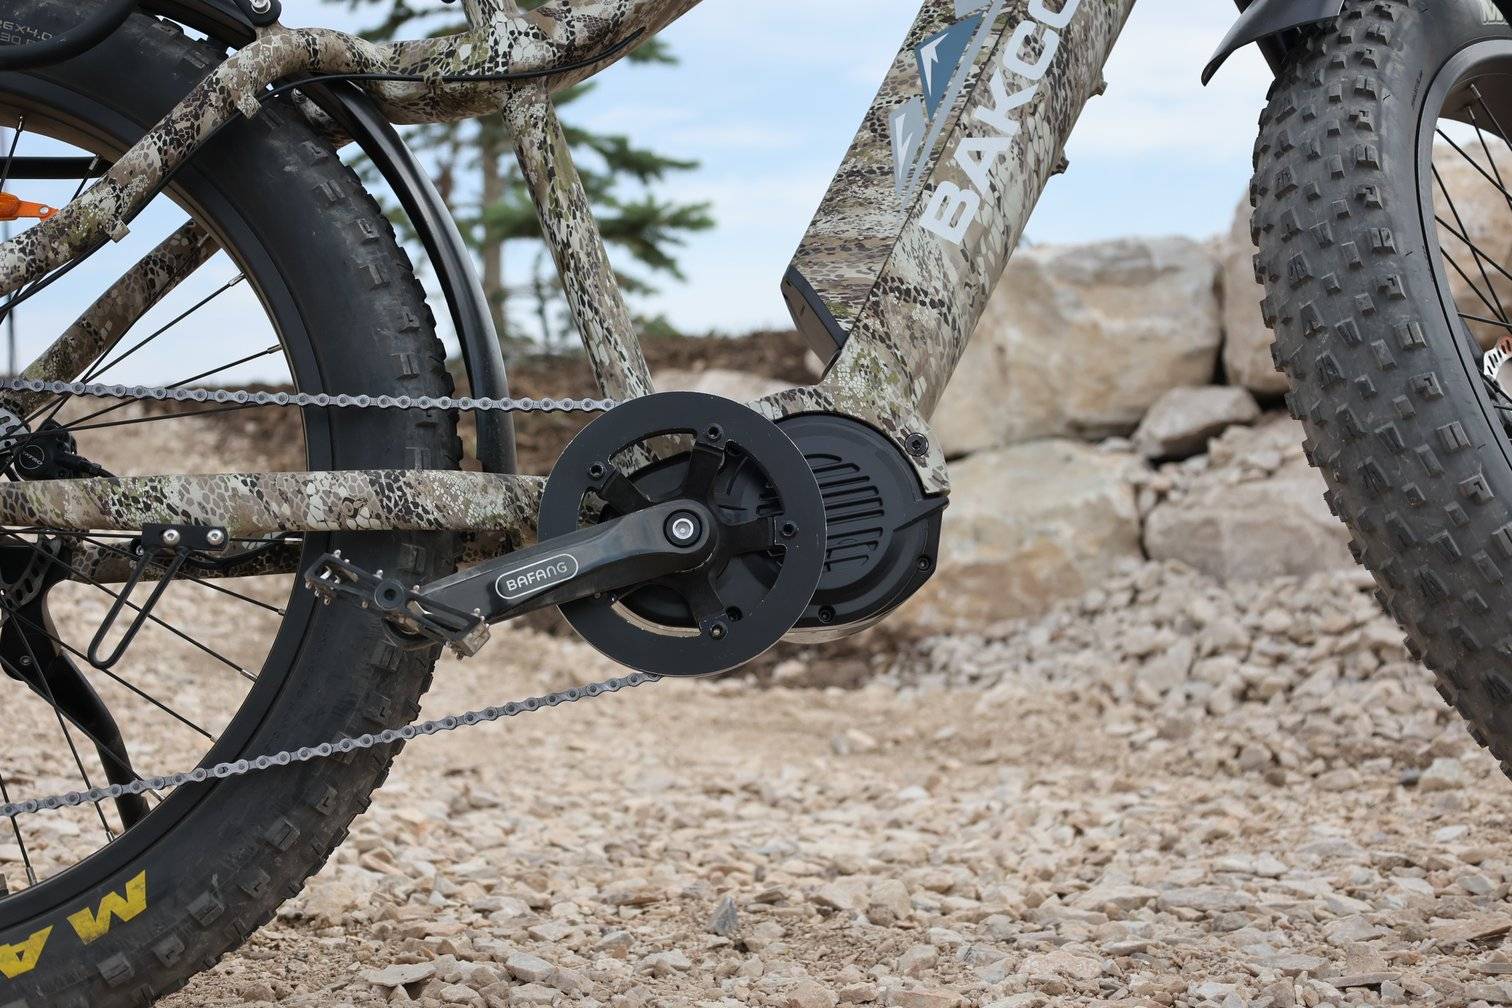 eBike Breakdown Off-Road? Here are the Tools and Parts You’ll Need